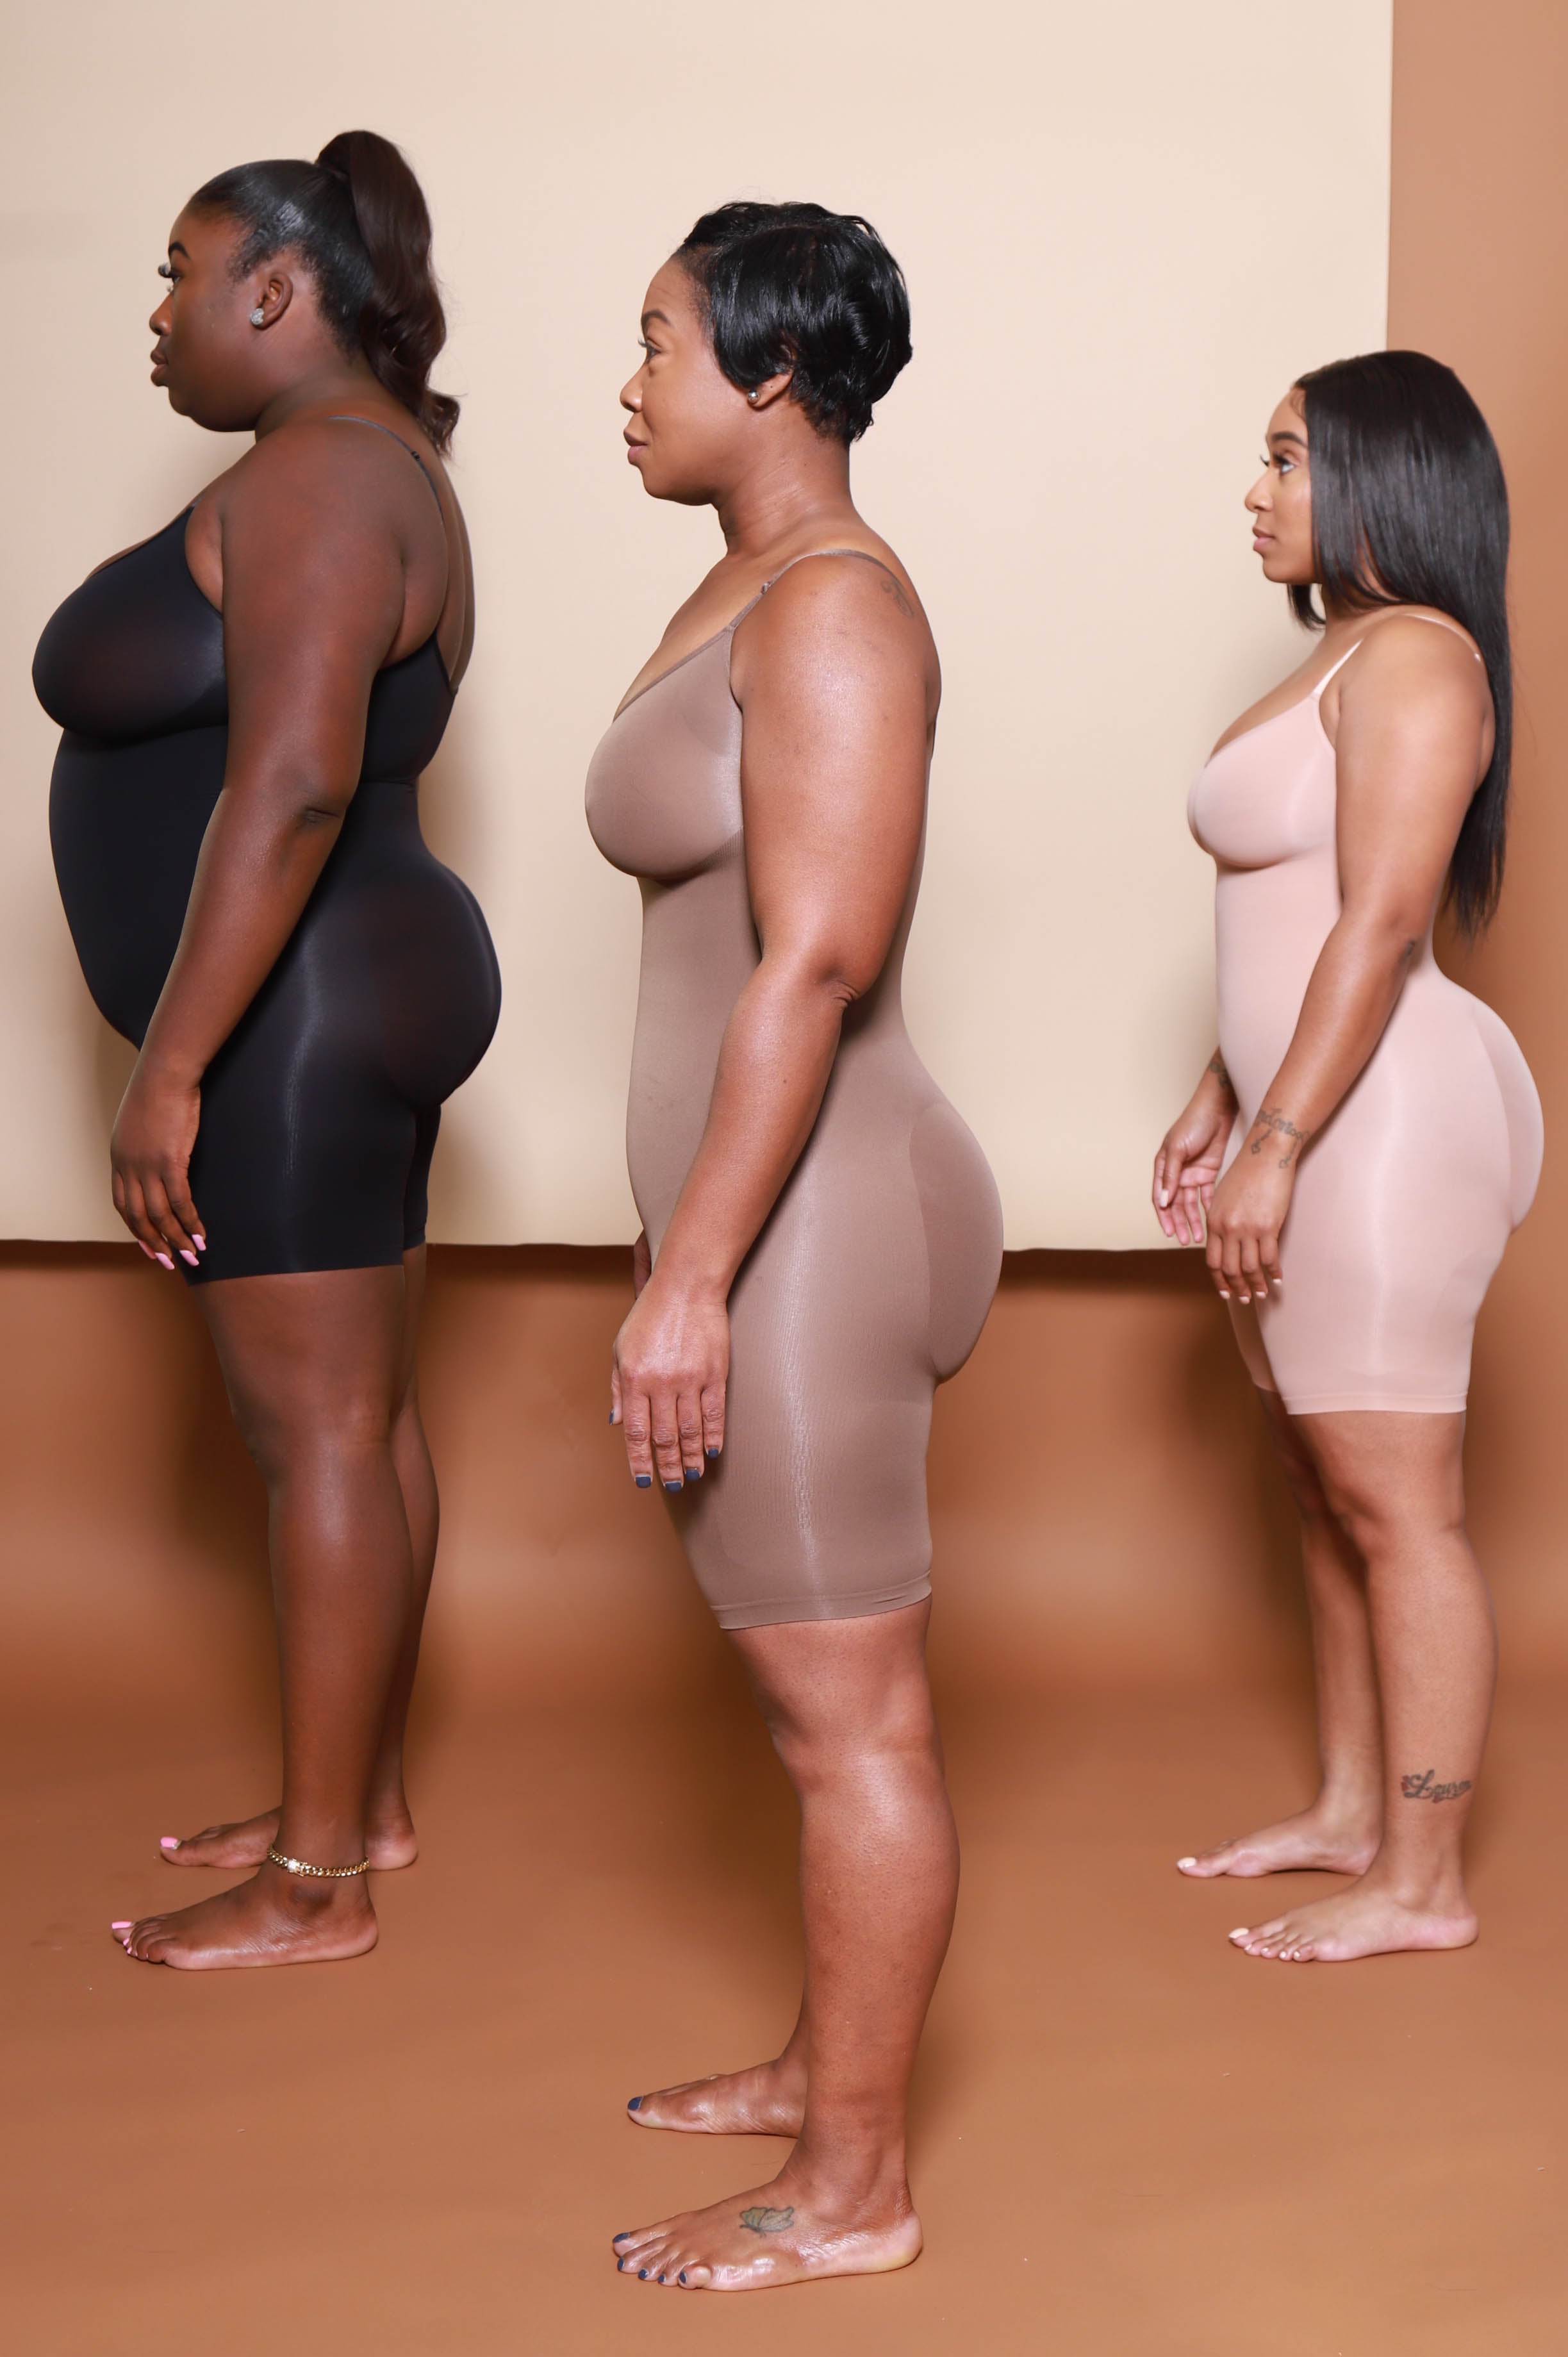 Skin Color Plus Size Adjustable Seamless Full Body Shaper High Rise